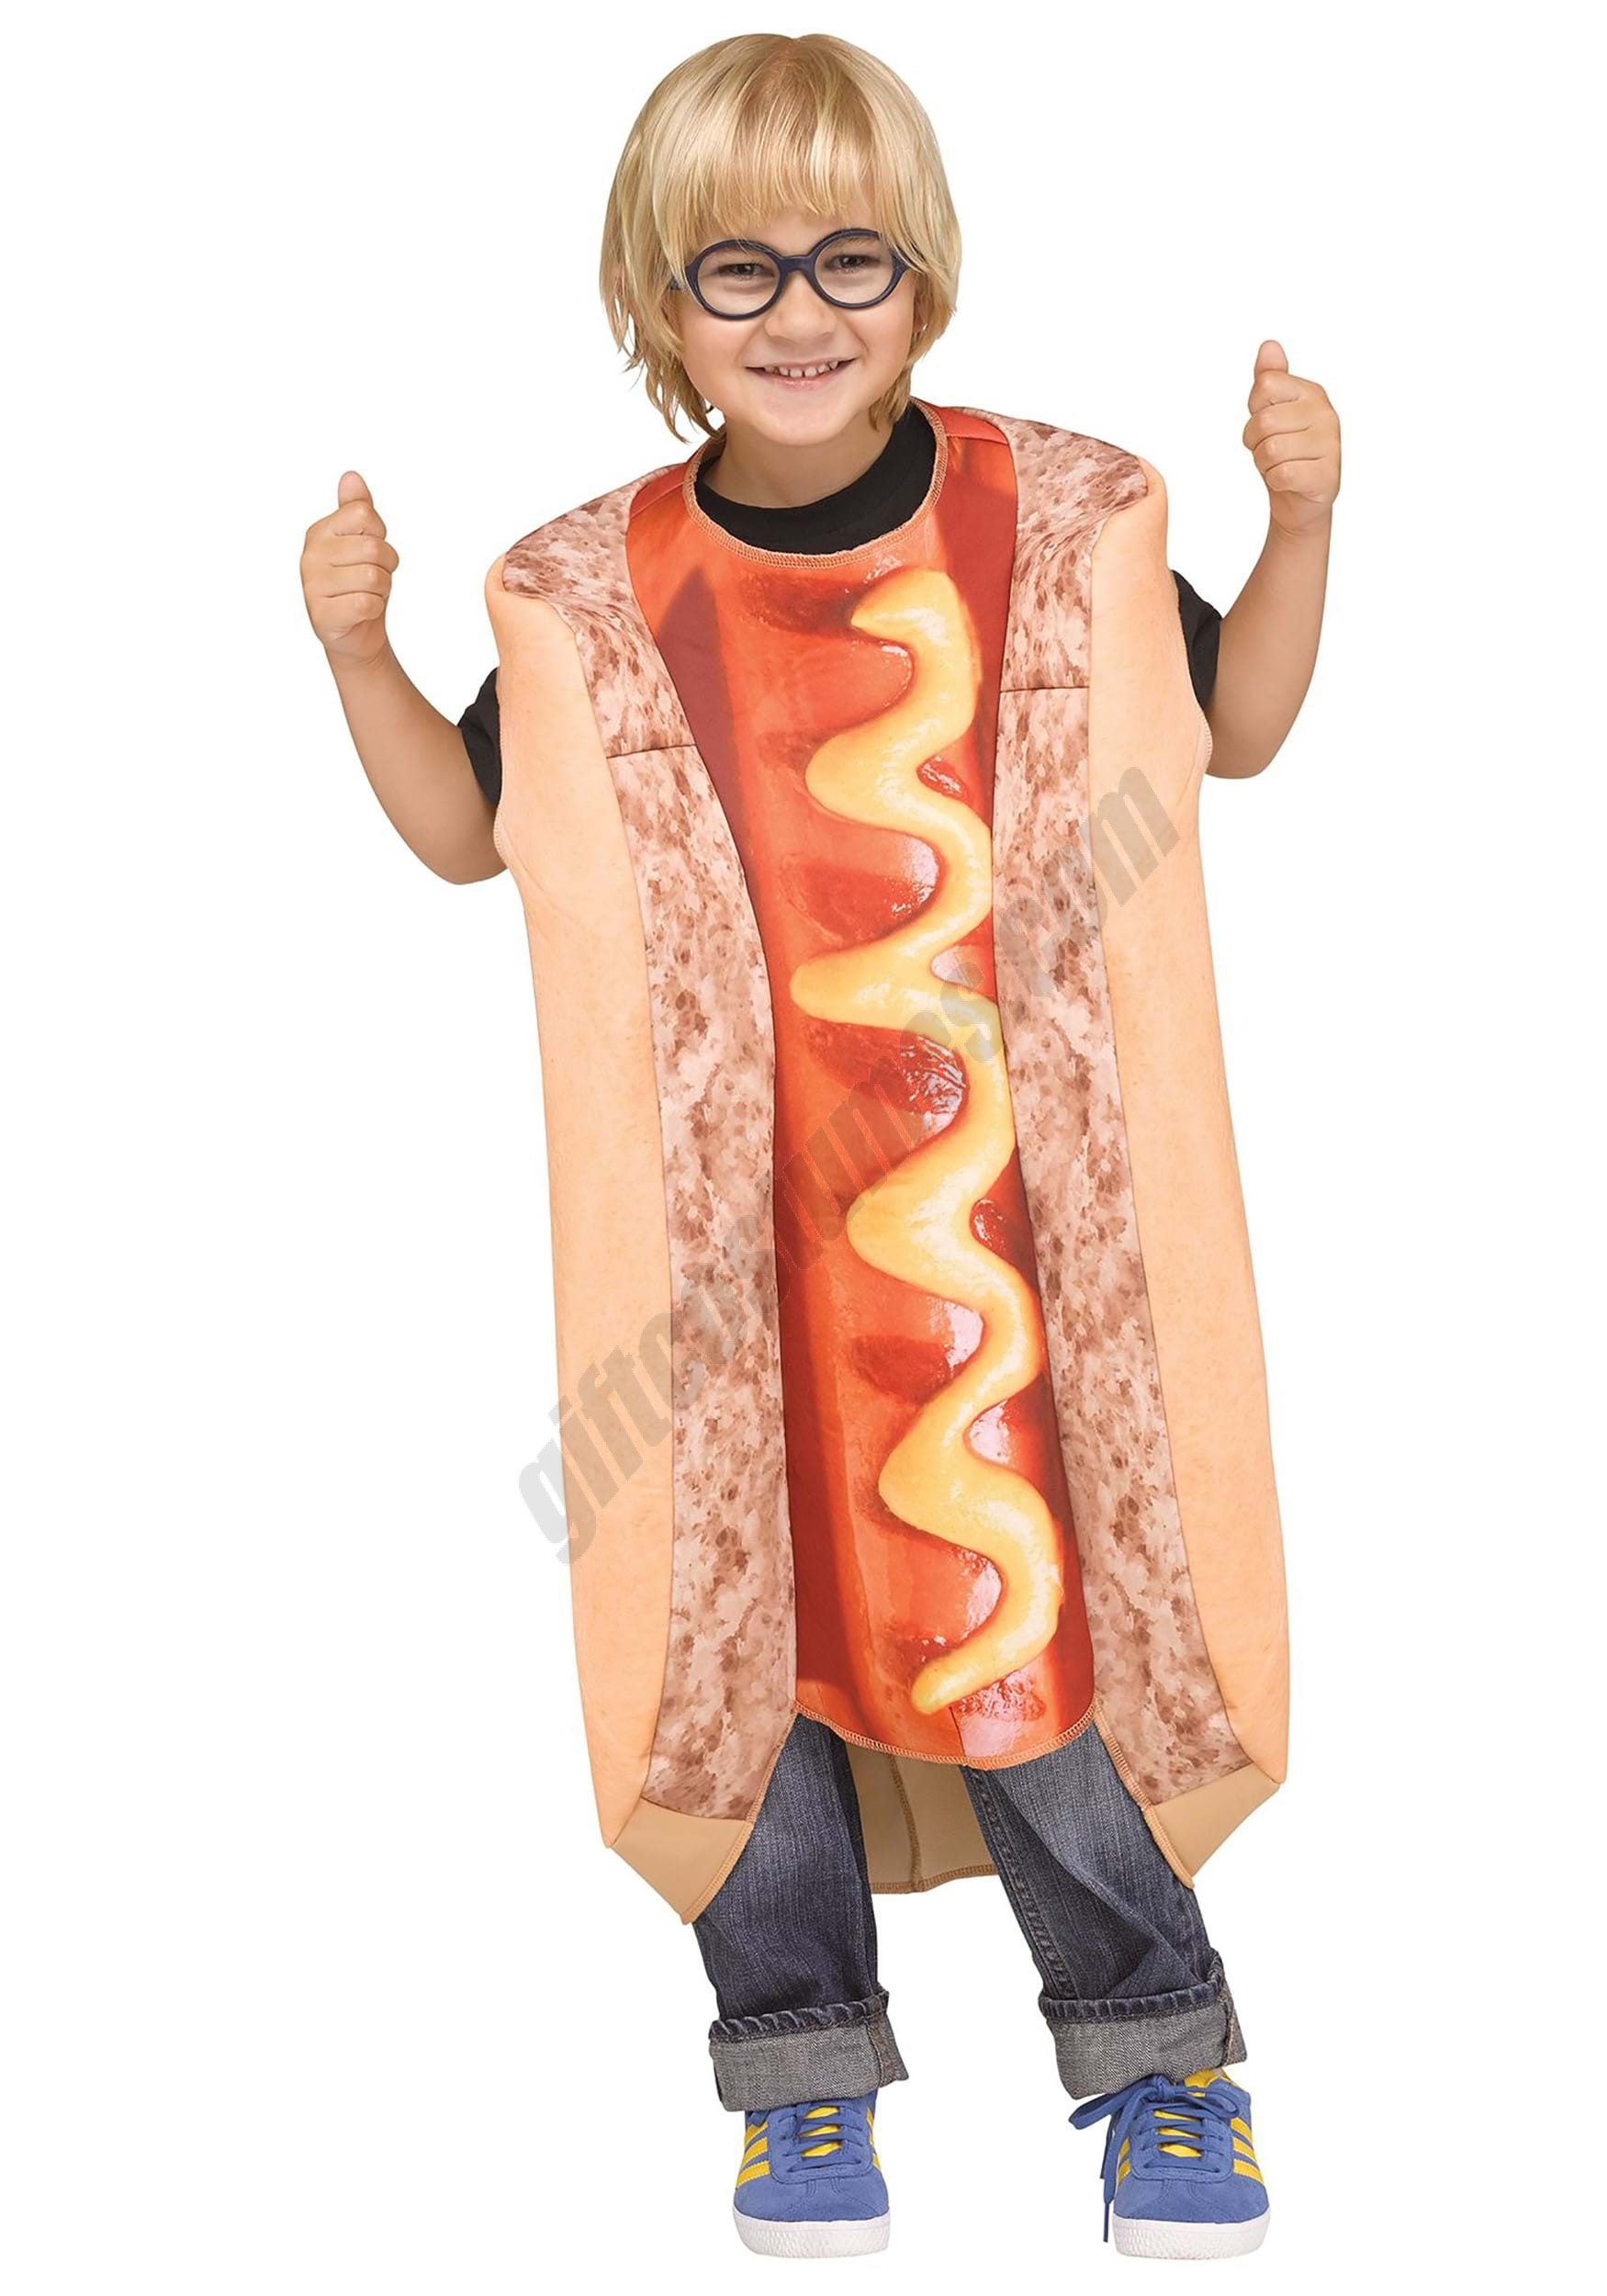 Photoreal Hot Dog Costume for Toddlers Promotions - Photoreal Hot Dog Costume for Toddlers Promotions